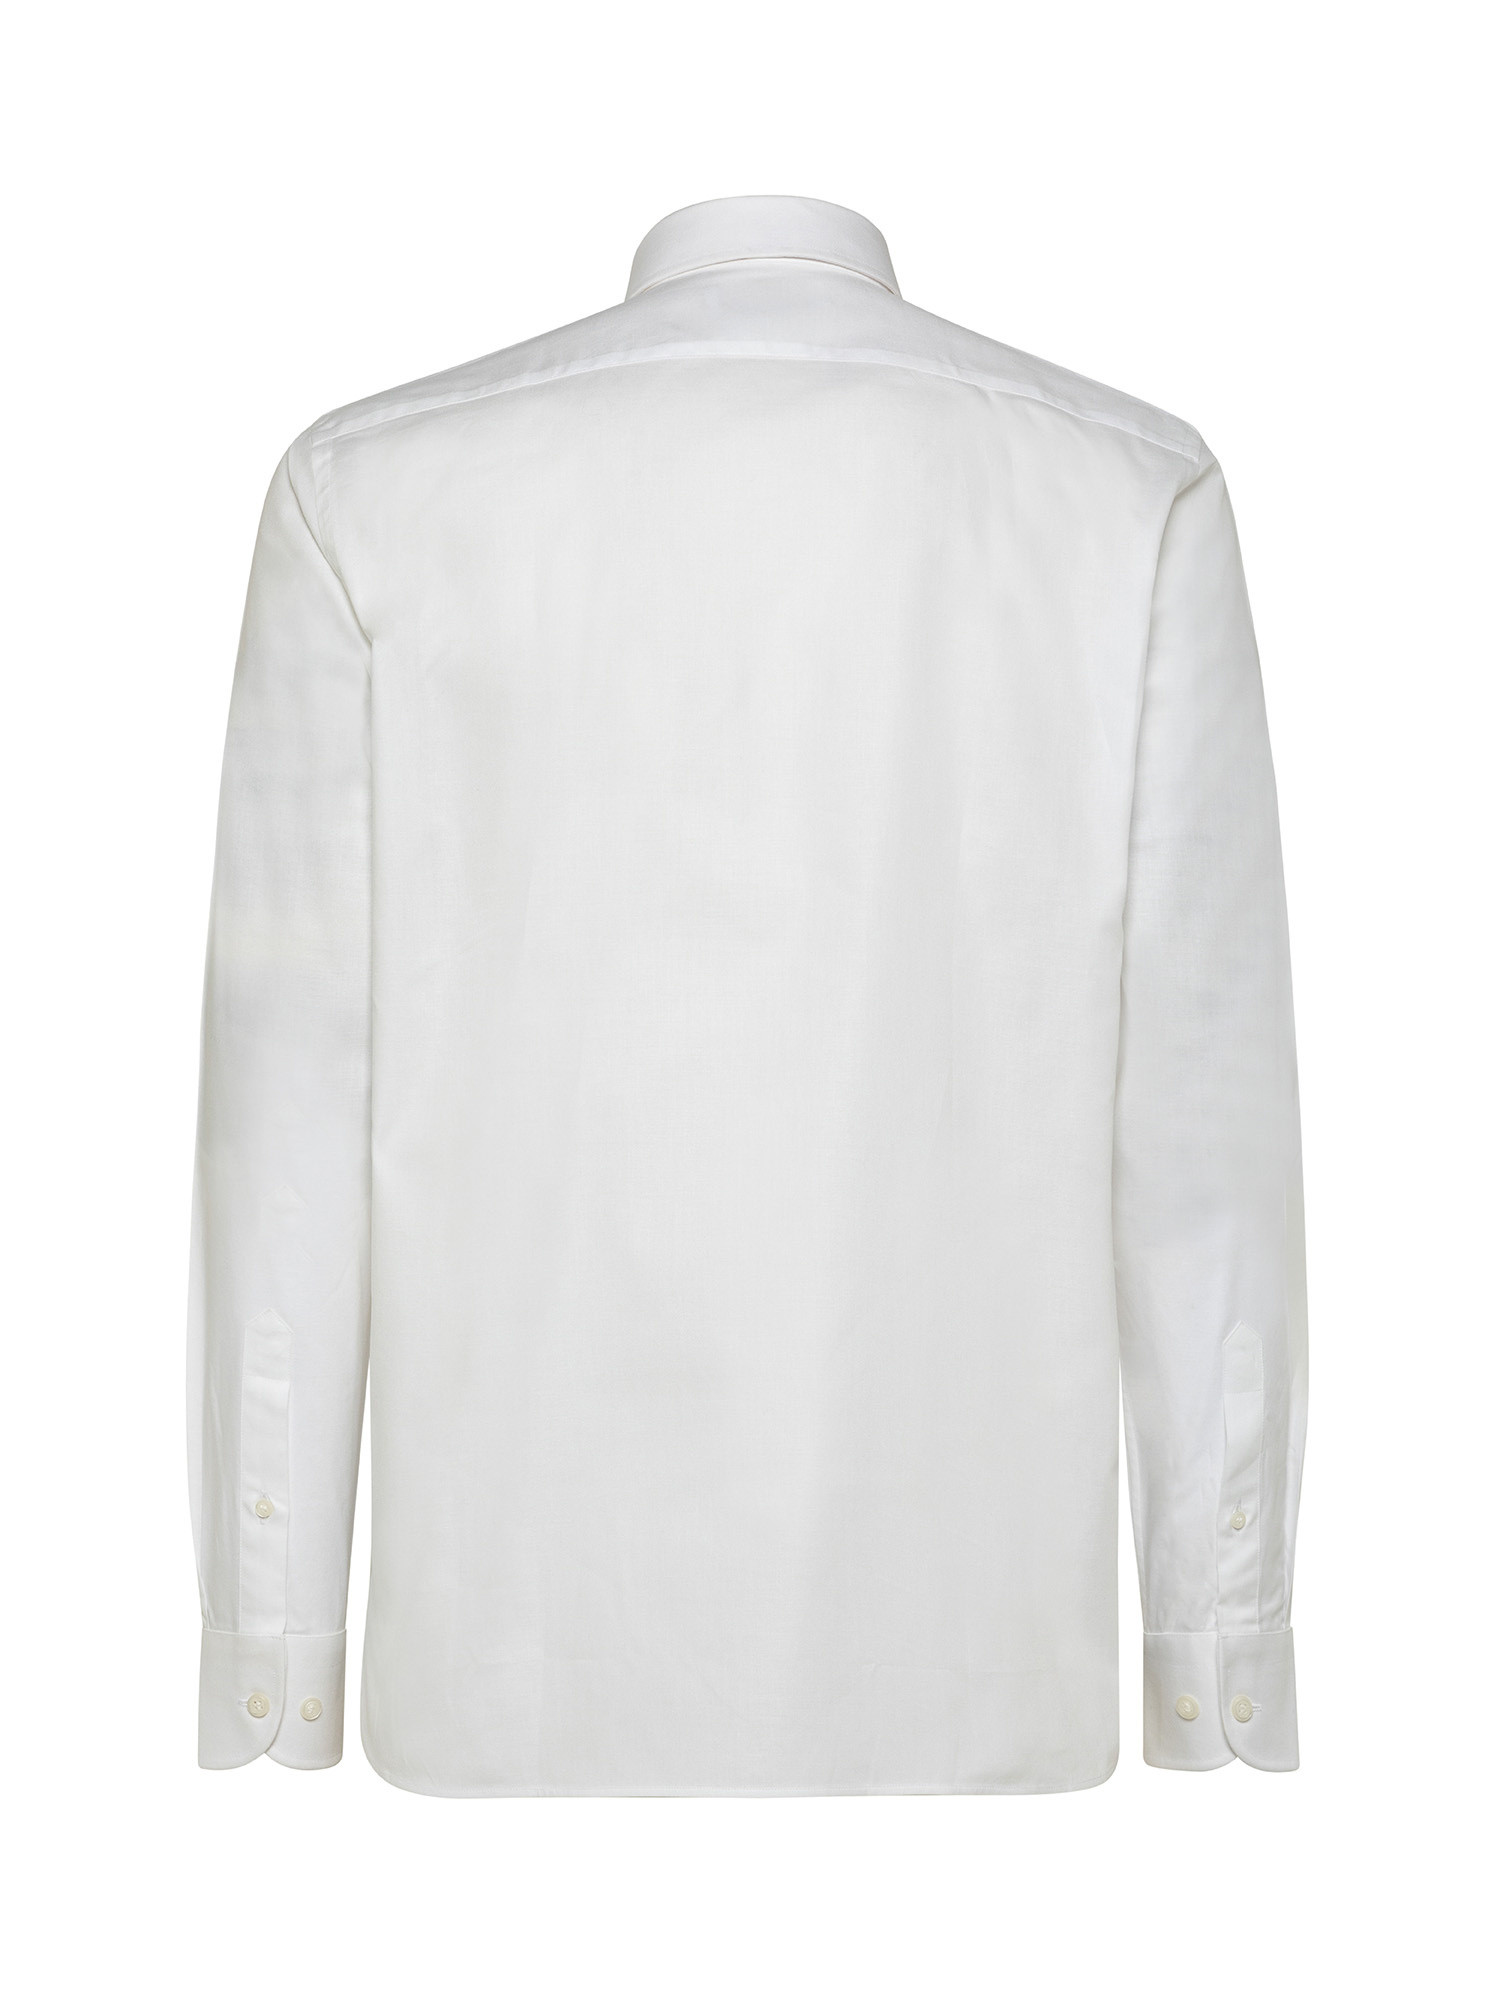 Basic tailor fit shirt in pure cotton, White, large image number 2